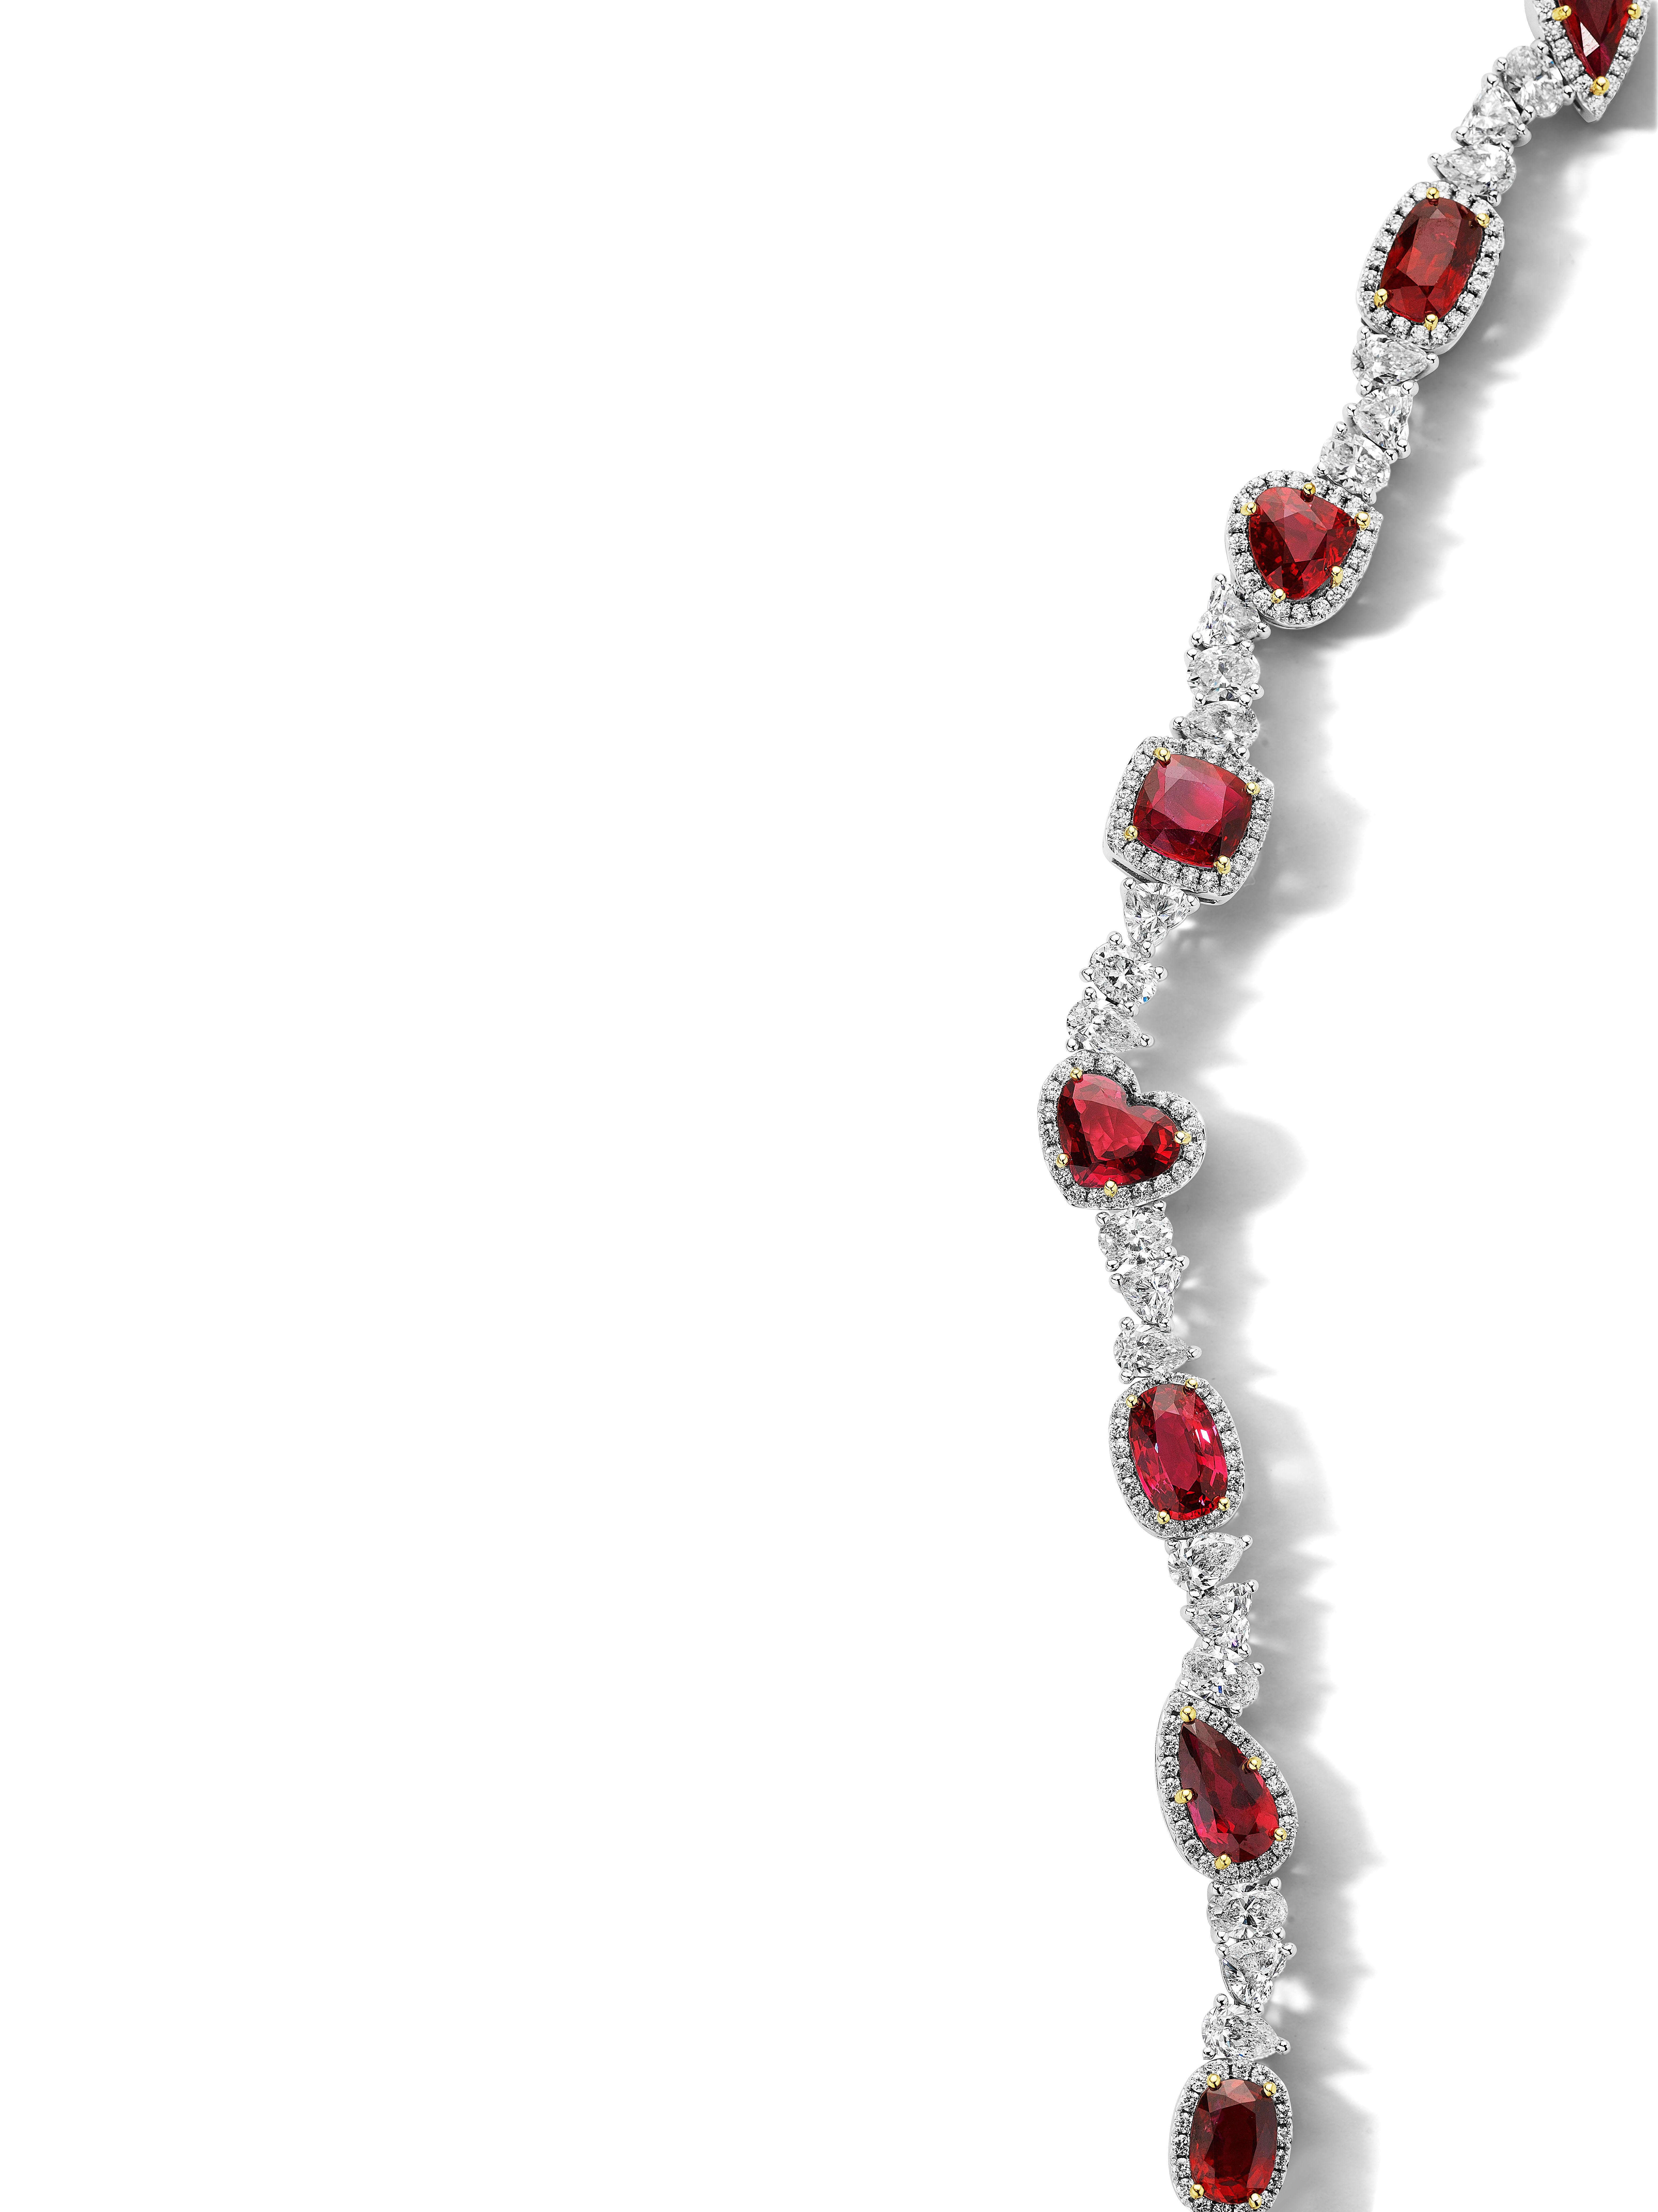 Cushion Cut 25.52ct Mixed Shape Ruby & Diamond Bracelet in 18KT White Gold For Sale